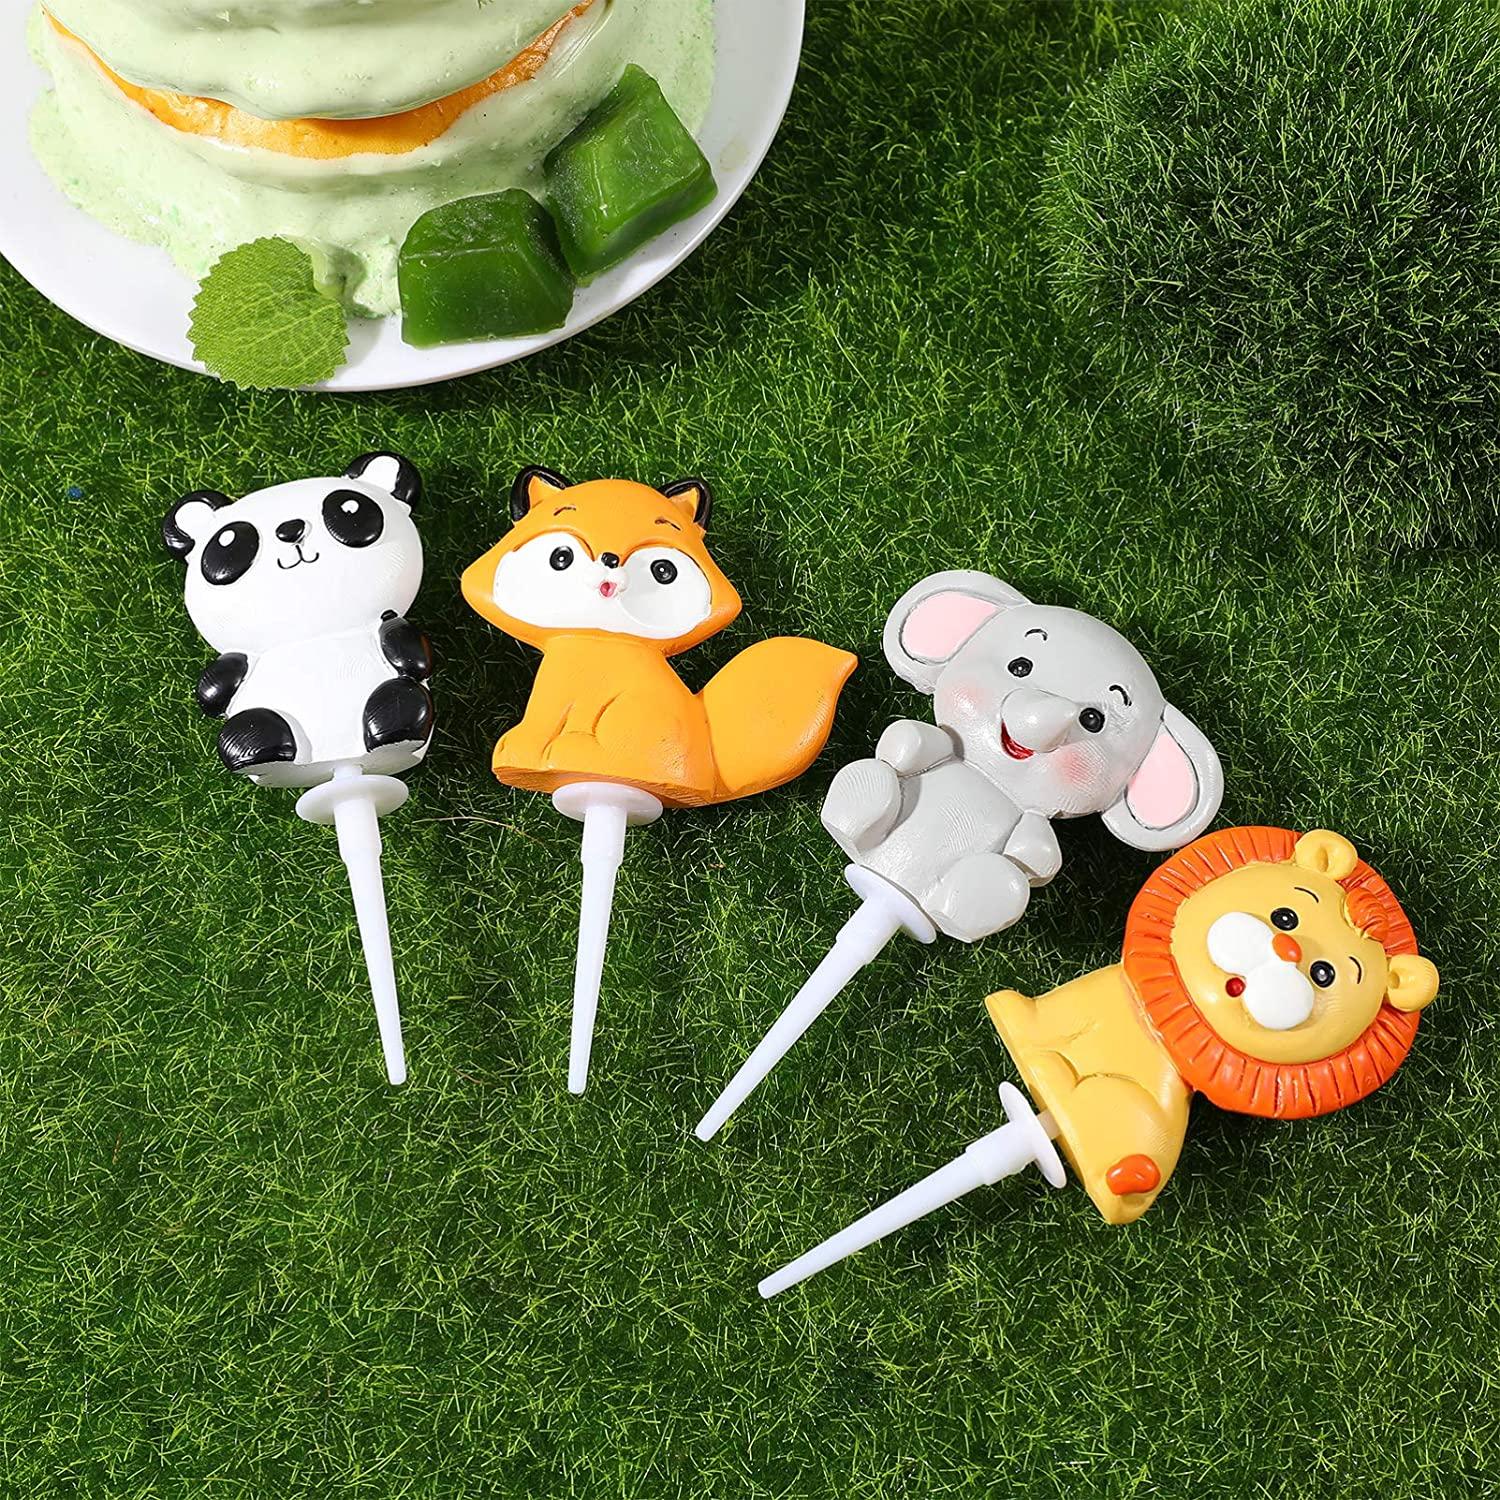 TOYANDONA 5Pcs Jungle Animal Cake Toppers, Zoo Animal Cake Toppers Jungle  Animals Cake Decorations for Baby Showers Birthday Party